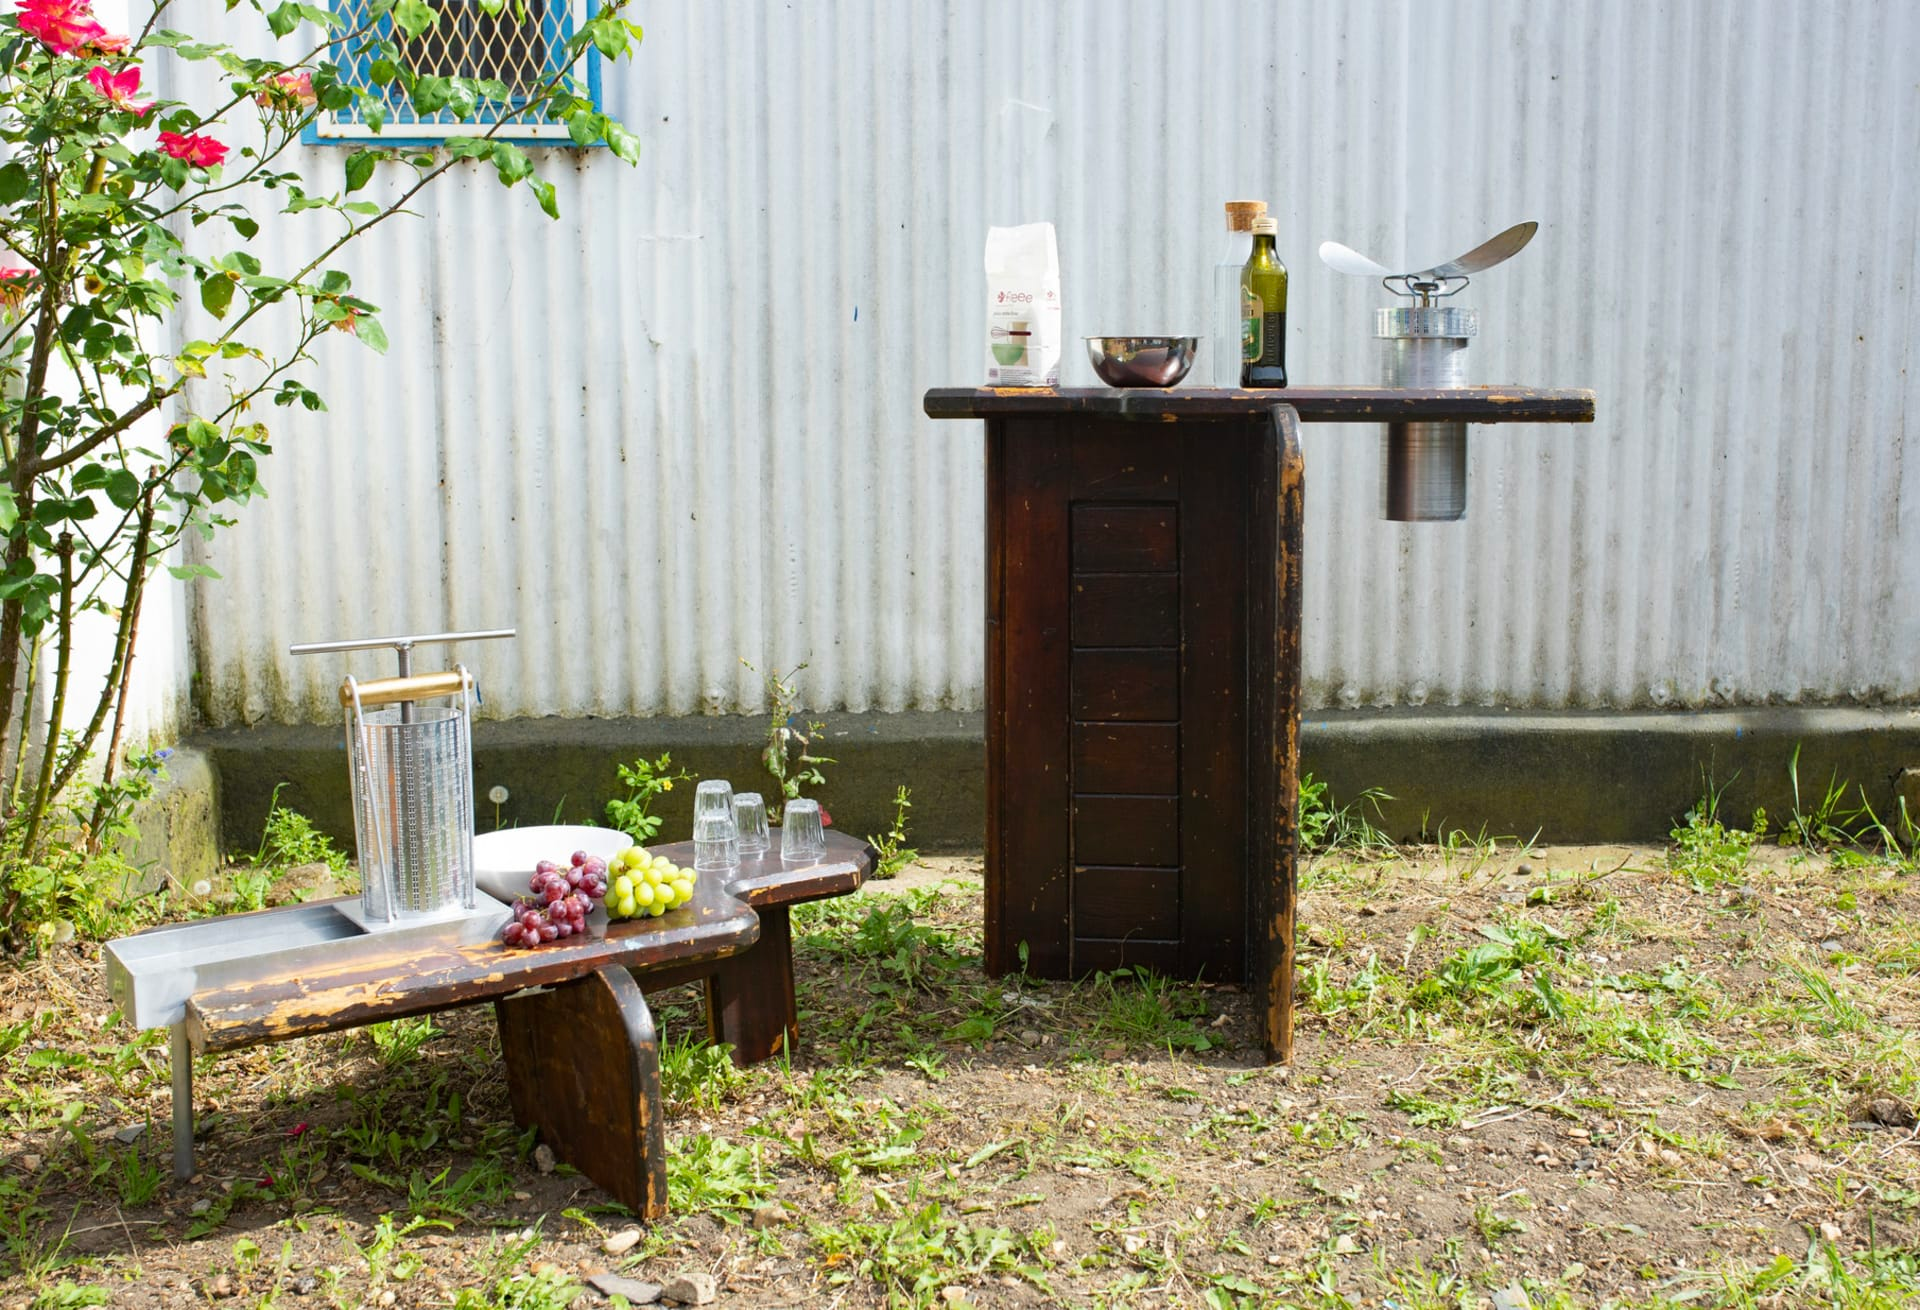 Photograph of two pieces of furniture outside, constructed of shabby dark wood and metal, one a low flat surface holding items, including grapes, the other tall holding a bag of flour and mixing bowl.